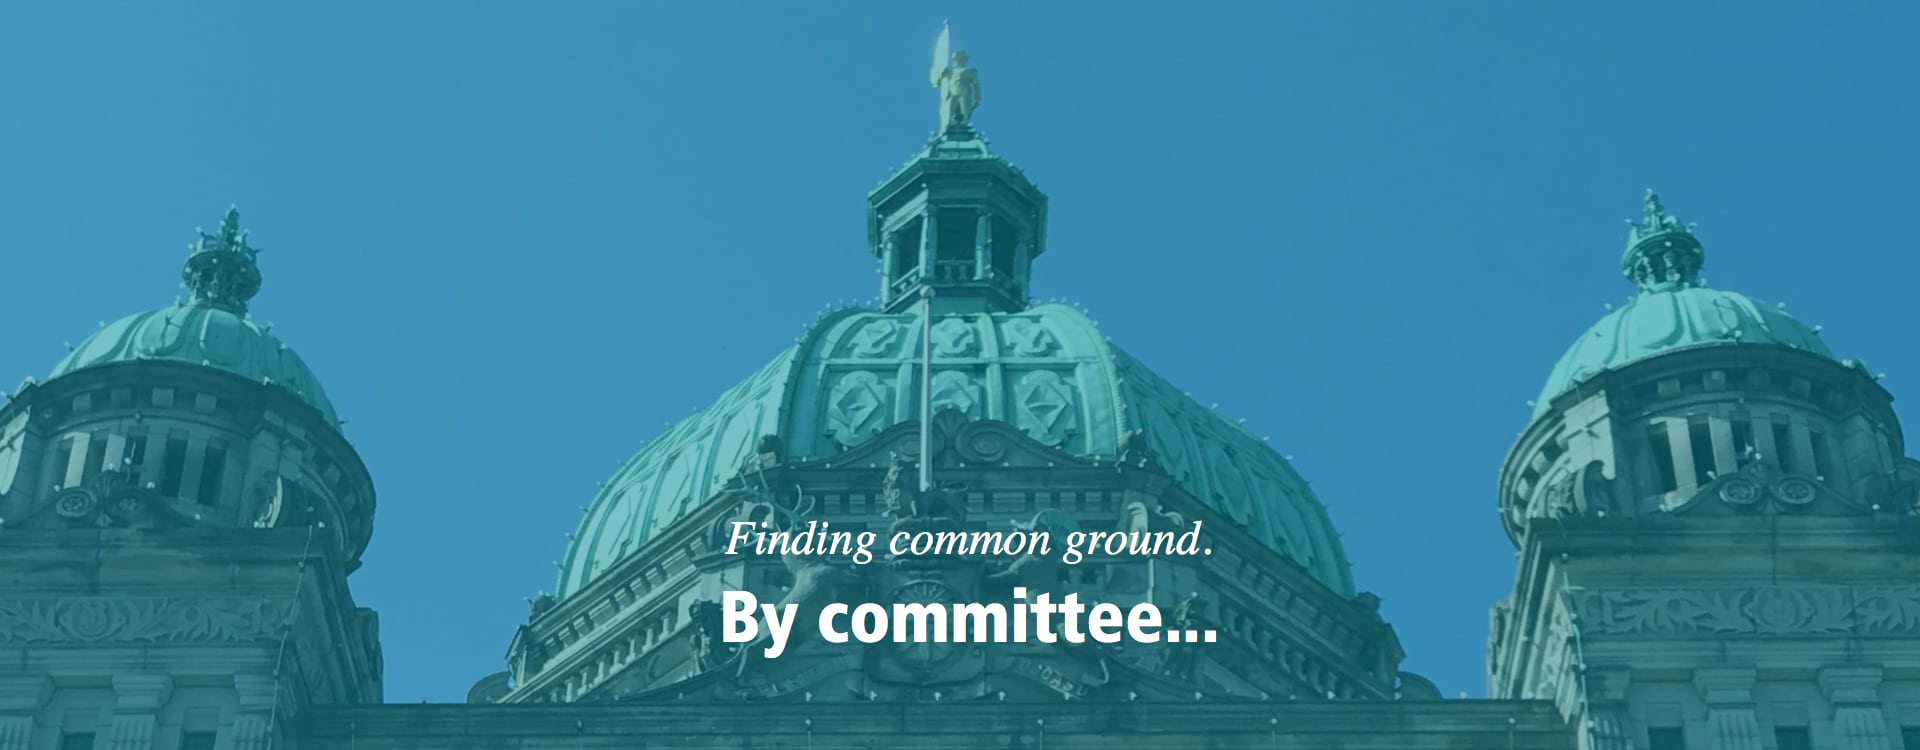 Finding common ground. By committee...